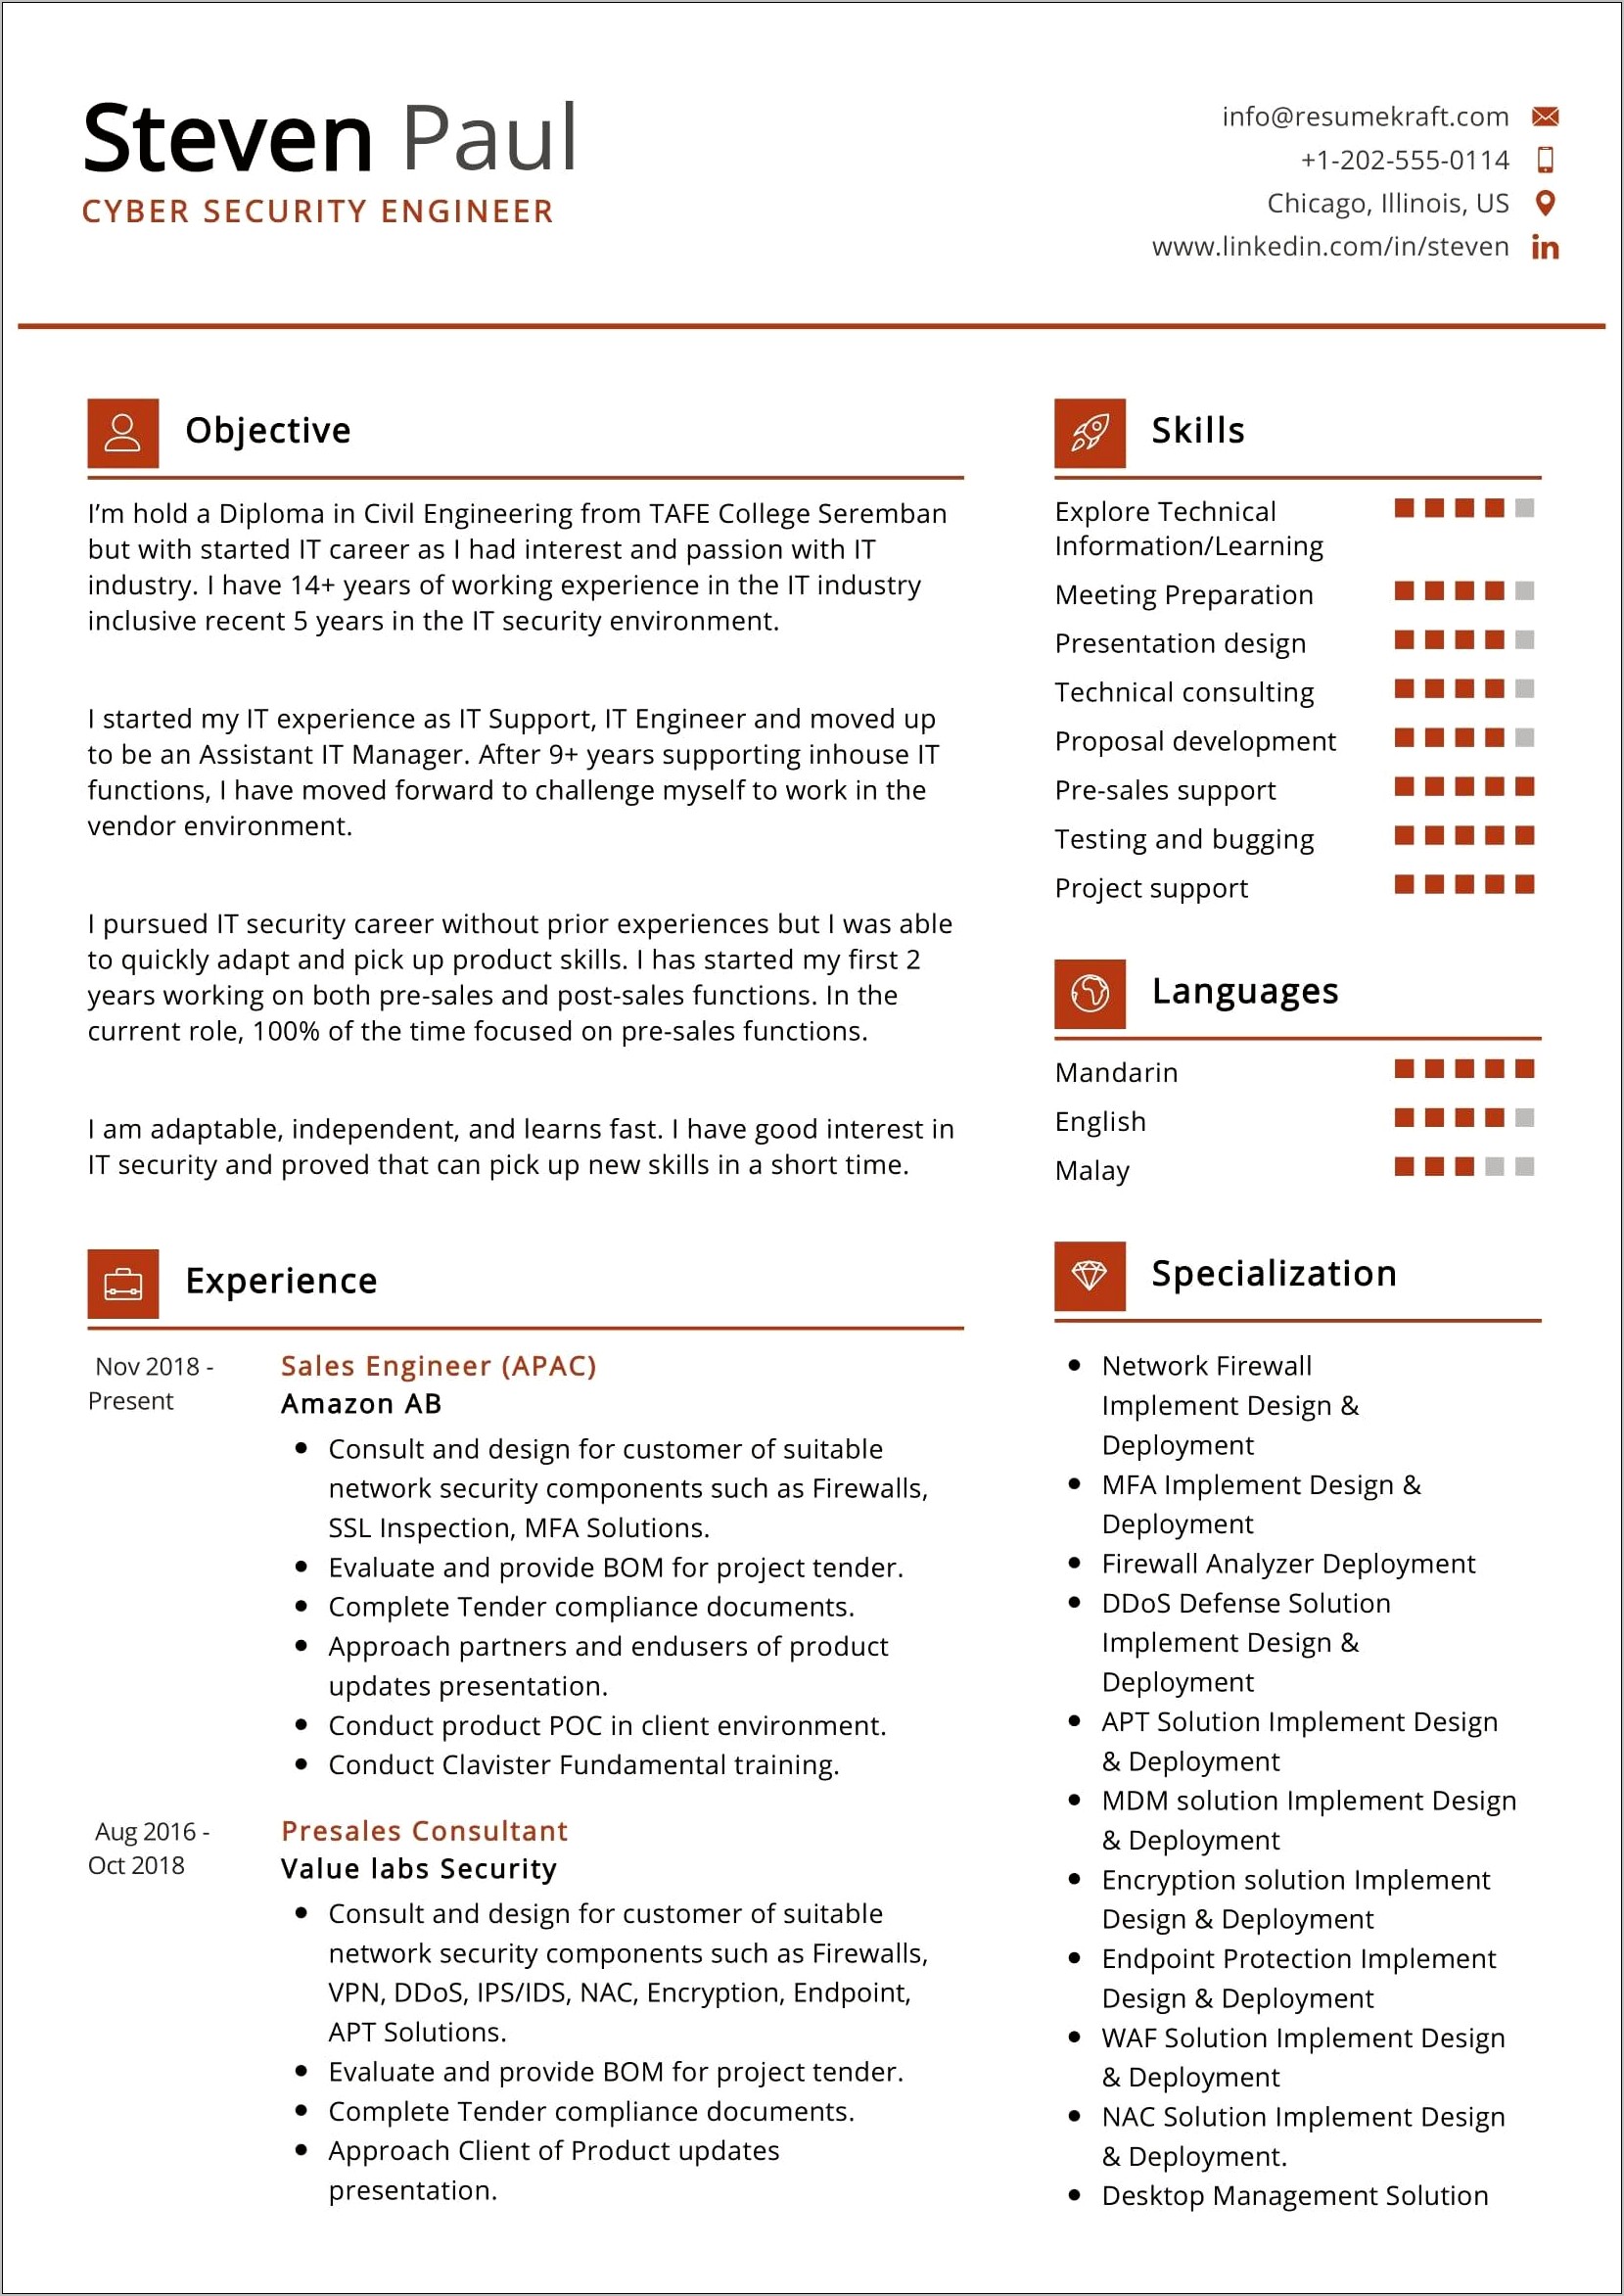 5 Years Experience Cyber Security Resume